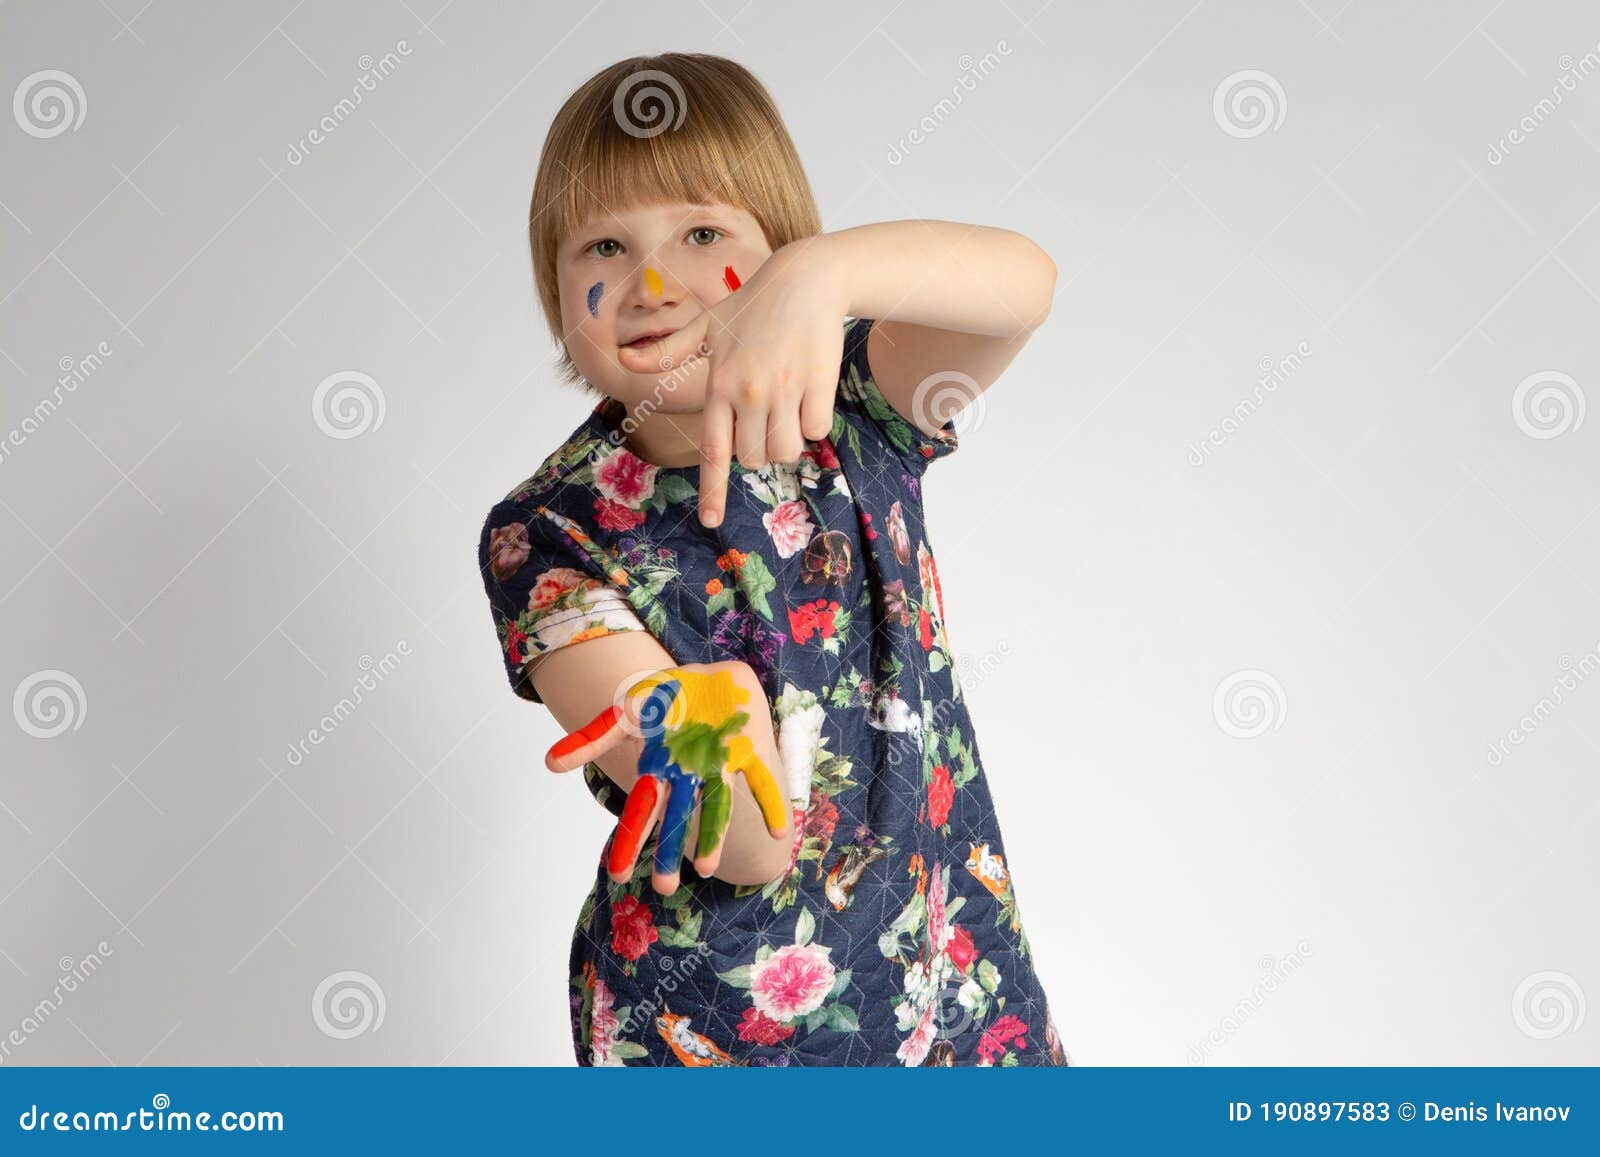 a small cheerful smiling girl shows index finger at leftist hands that she got dirty in facial paint